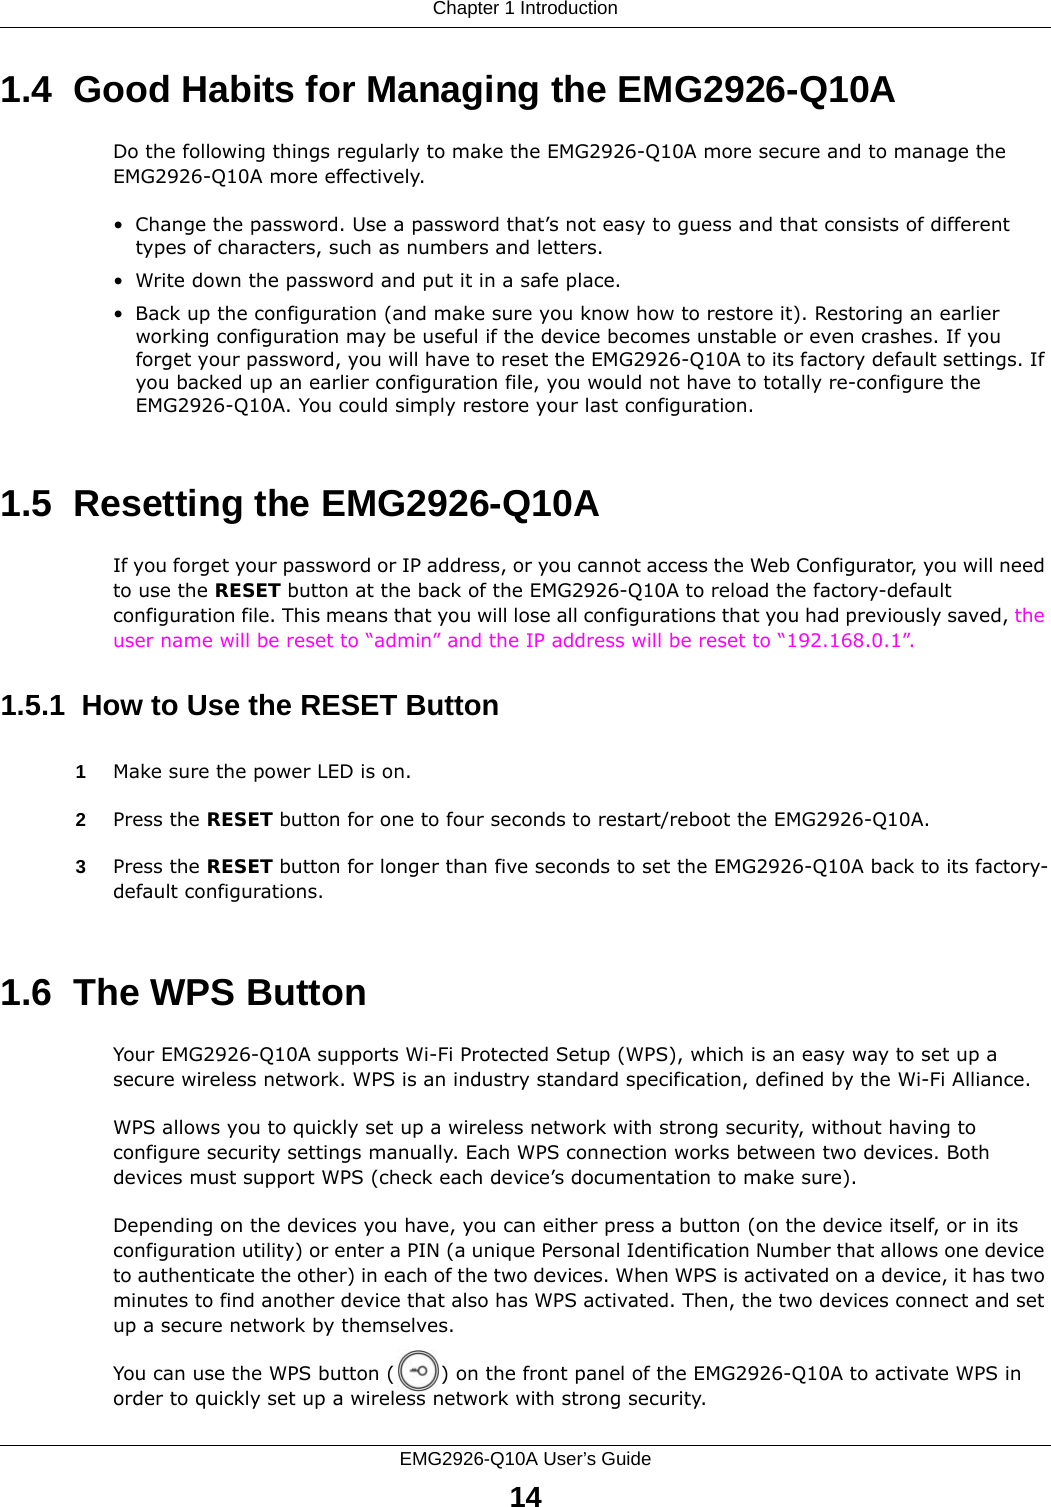 Chapter 1 IntroductionEMG2926-Q10A User’s Guide141.4  Good Habits for Managing the EMG2926-Q10ADo the following things regularly to make the EMG2926-Q10A more secure and to manage the EMG2926-Q10A more effectively.• Change the password. Use a password that’s not easy to guess and that consists of different types of characters, such as numbers and letters.• Write down the password and put it in a safe place.• Back up the configuration (and make sure you know how to restore it). Restoring an earlier working configuration may be useful if the device becomes unstable or even crashes. If you forget your password, you will have to reset the EMG2926-Q10A to its factory default settings. If you backed up an earlier configuration file, you would not have to totally re-configure the EMG2926-Q10A. You could simply restore your last configuration.1.5  Resetting the EMG2926-Q10AIf you forget your password or IP address, or you cannot access the Web Configurator, you will need to use the RESET button at the back of the EMG2926-Q10A to reload the factory-default configuration file. This means that you will lose all configurations that you had previously saved, the user name will be reset to “admin” and the IP address will be reset to “192.168.0.1”.1.5.1  How to Use the RESET Button1Make sure the power LED is on.2Press the RESET button for one to four seconds to restart/reboot the EMG2926-Q10A.3Press the RESET button for longer than five seconds to set the EMG2926-Q10A back to its factory-default configurations.1.6  The WPS ButtonYour EMG2926-Q10A supports Wi-Fi Protected Setup (WPS), which is an easy way to set up a secure wireless network. WPS is an industry standard specification, defined by the Wi-Fi Alliance.WPS allows you to quickly set up a wireless network with strong security, without having to configure security settings manually. Each WPS connection works between two devices. Both devices must support WPS (check each device’s documentation to make sure). Depending on the devices you have, you can either press a button (on the device itself, or in its configuration utility) or enter a PIN (a unique Personal Identification Number that allows one device to authenticate the other) in each of the two devices. When WPS is activated on a device, it has two minutes to find another device that also has WPS activated. Then, the two devices connect and set up a secure network by themselves.You can use the WPS button ( ) on the front panel of the EMG2926-Q10A to activate WPS in order to quickly set up a wireless network with strong security.